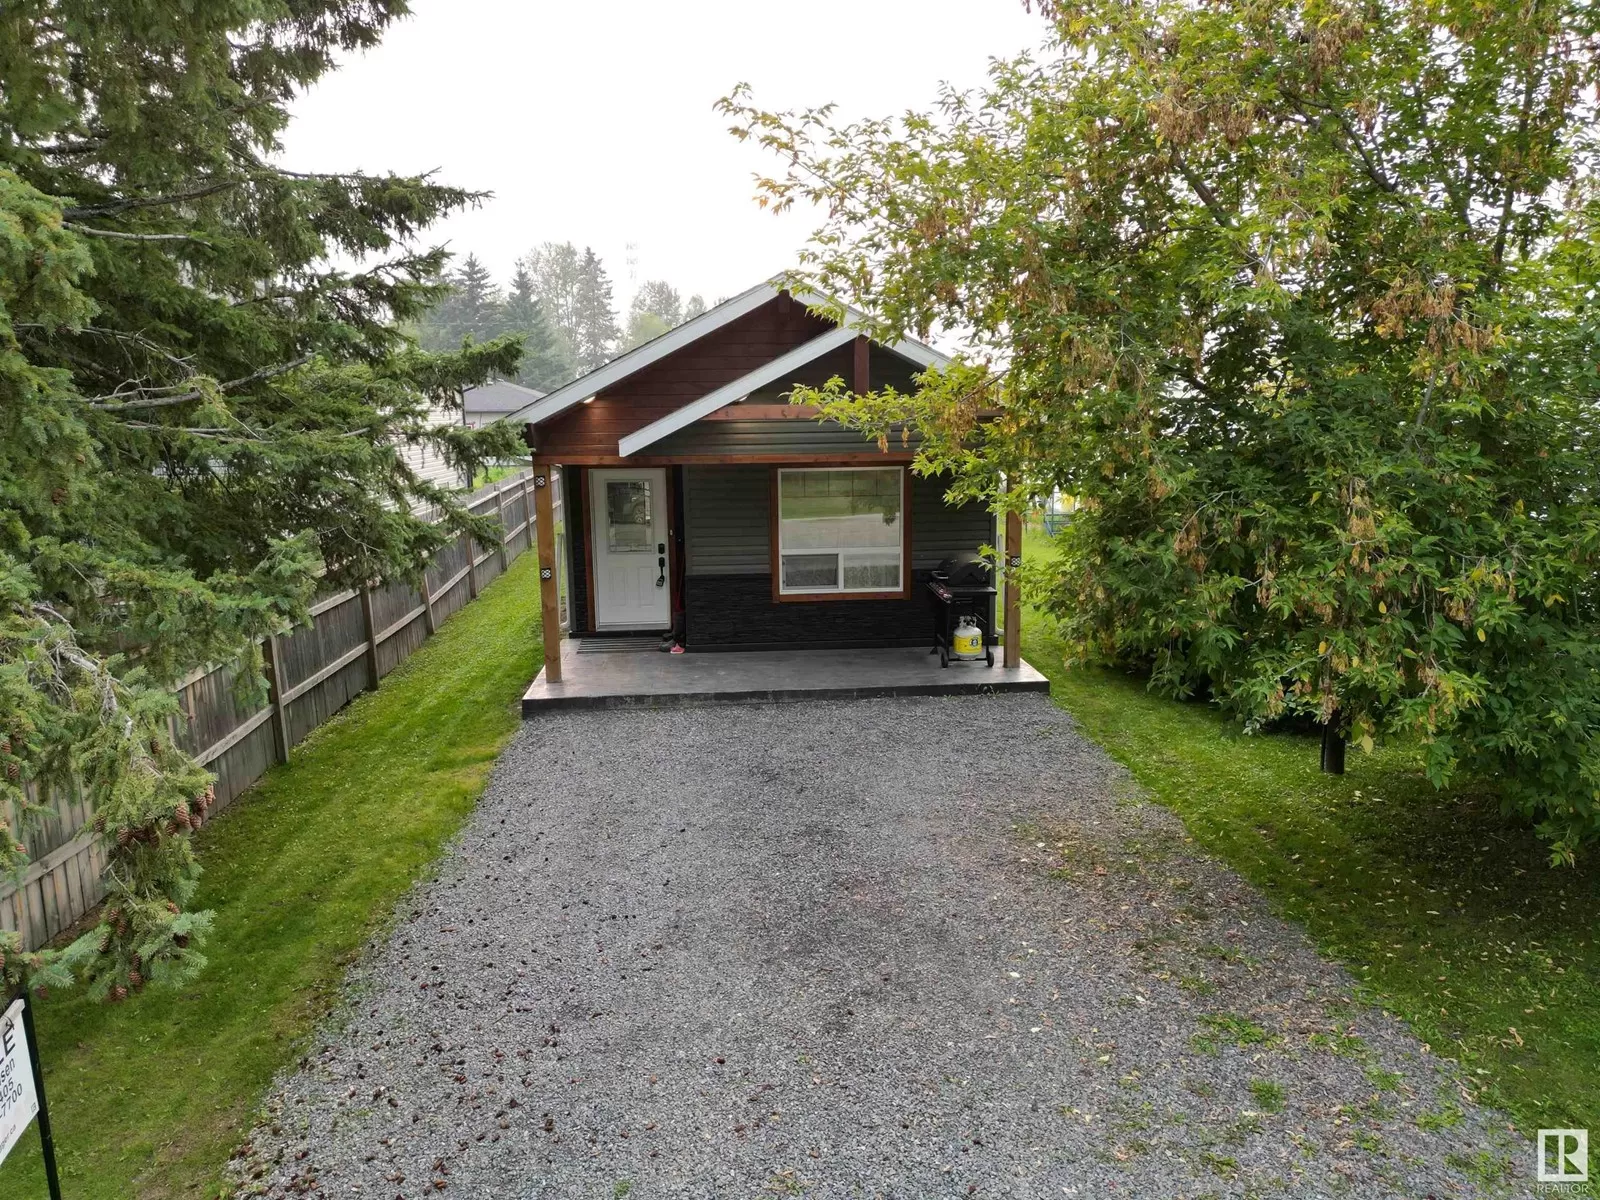 House for rent: 4910 50 St, Peers, Alberta T0E 0W0